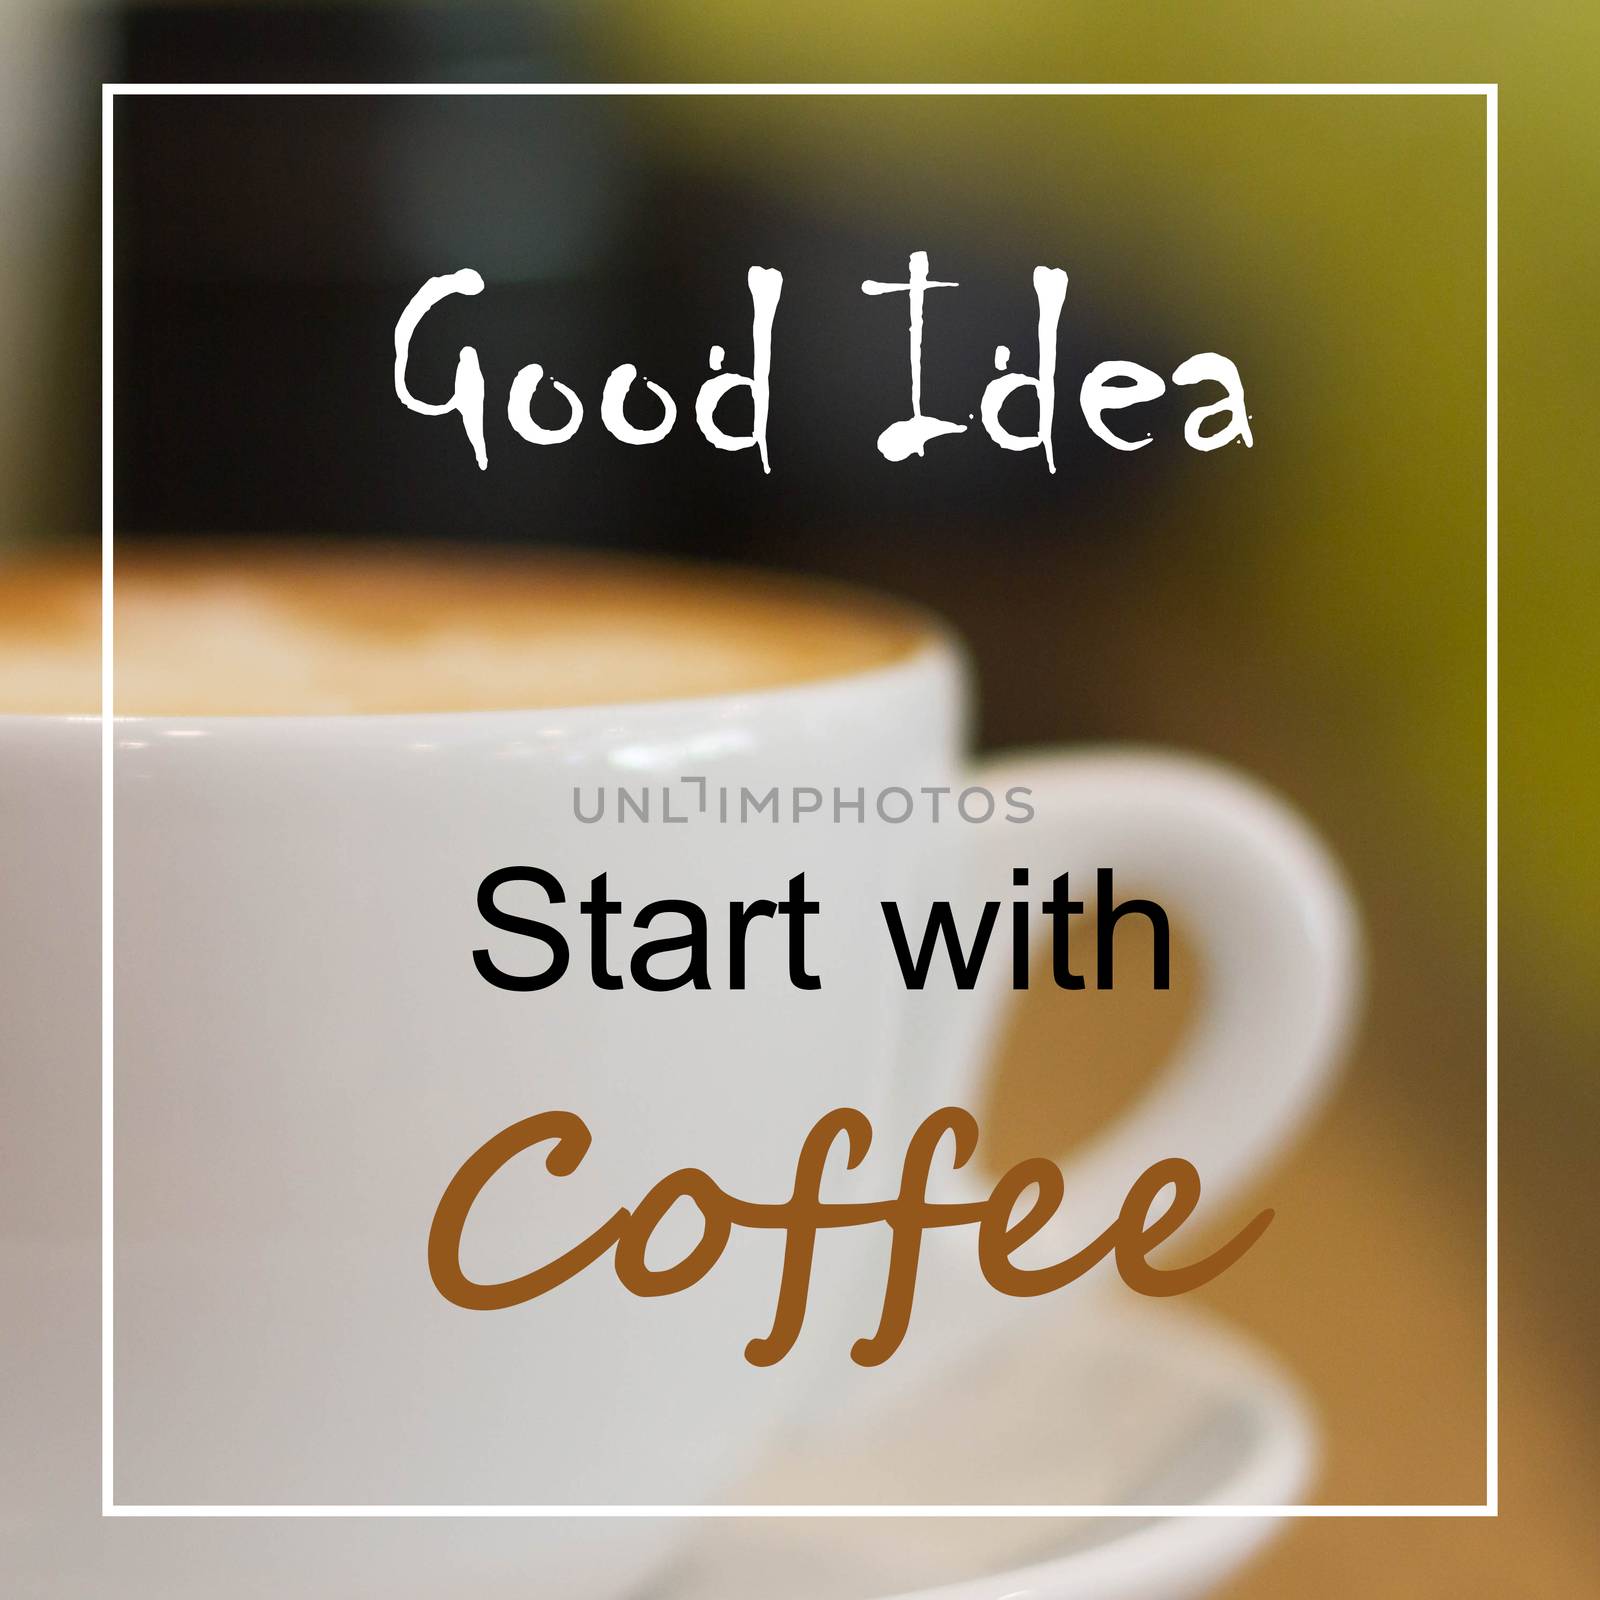 Inspirational motivational quote on cup of coffee background. by phatpc